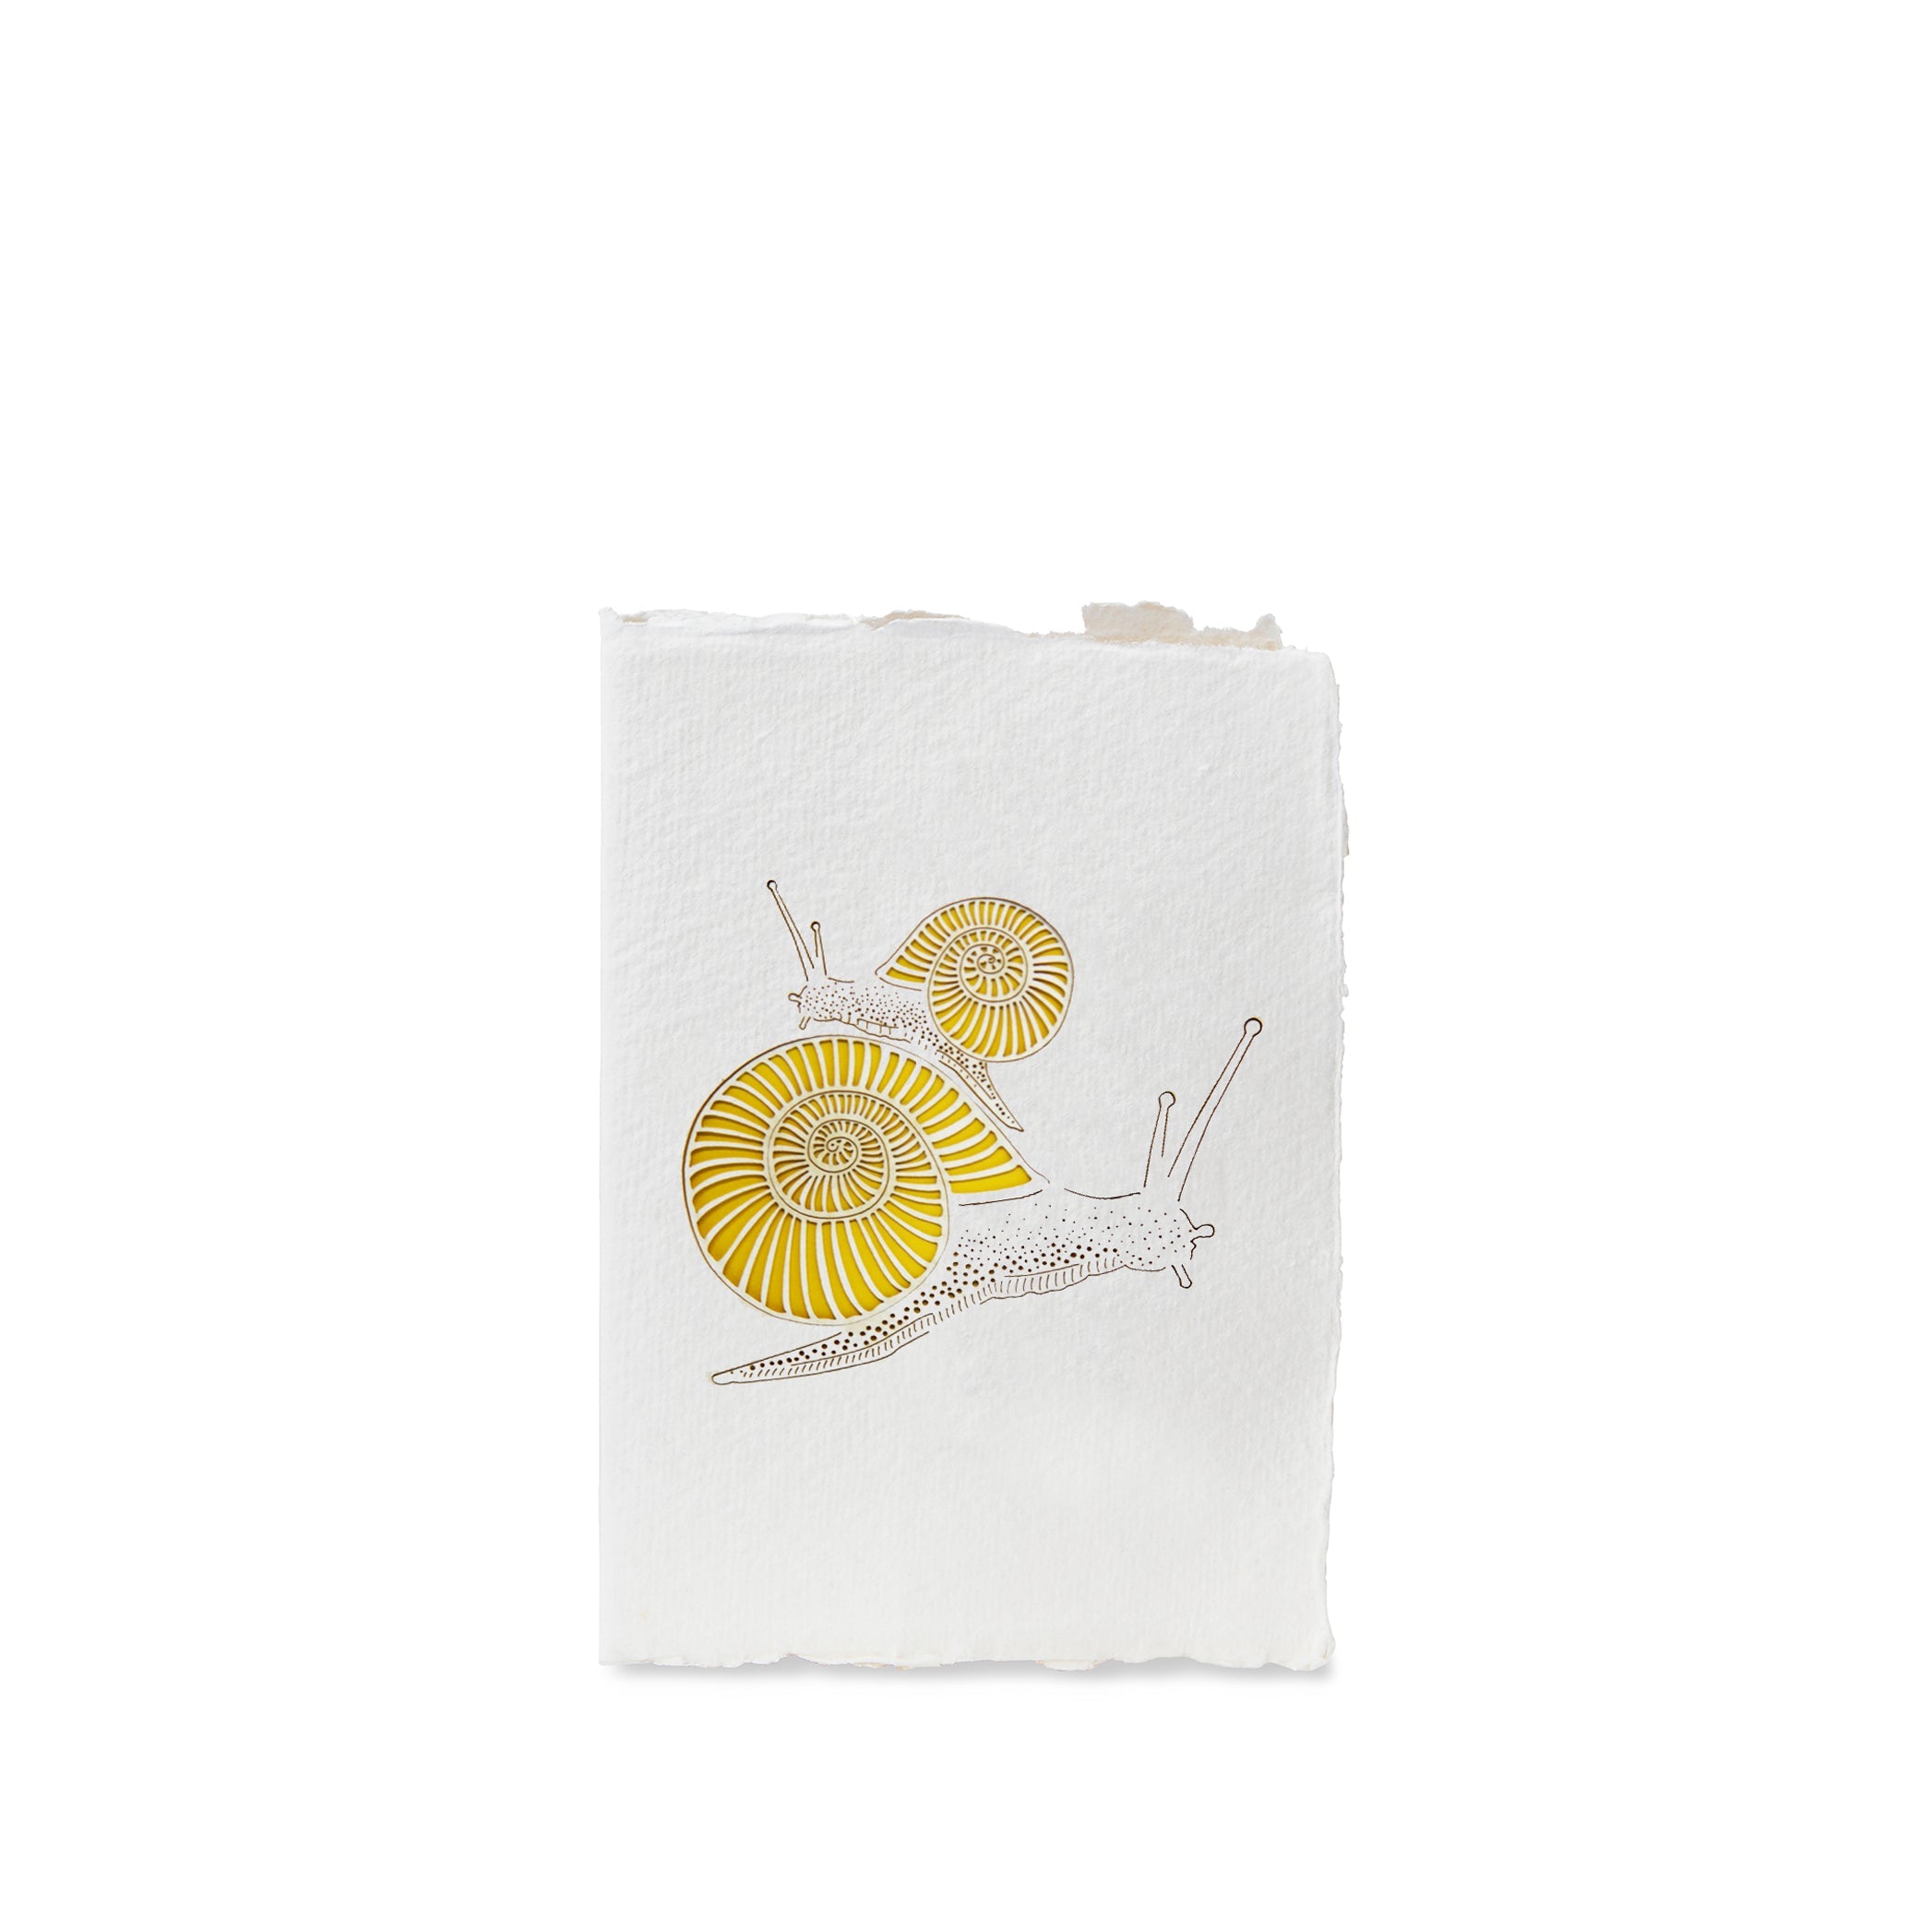 Handmade Paper Greeting Card with Snail, 15cm x 10cm